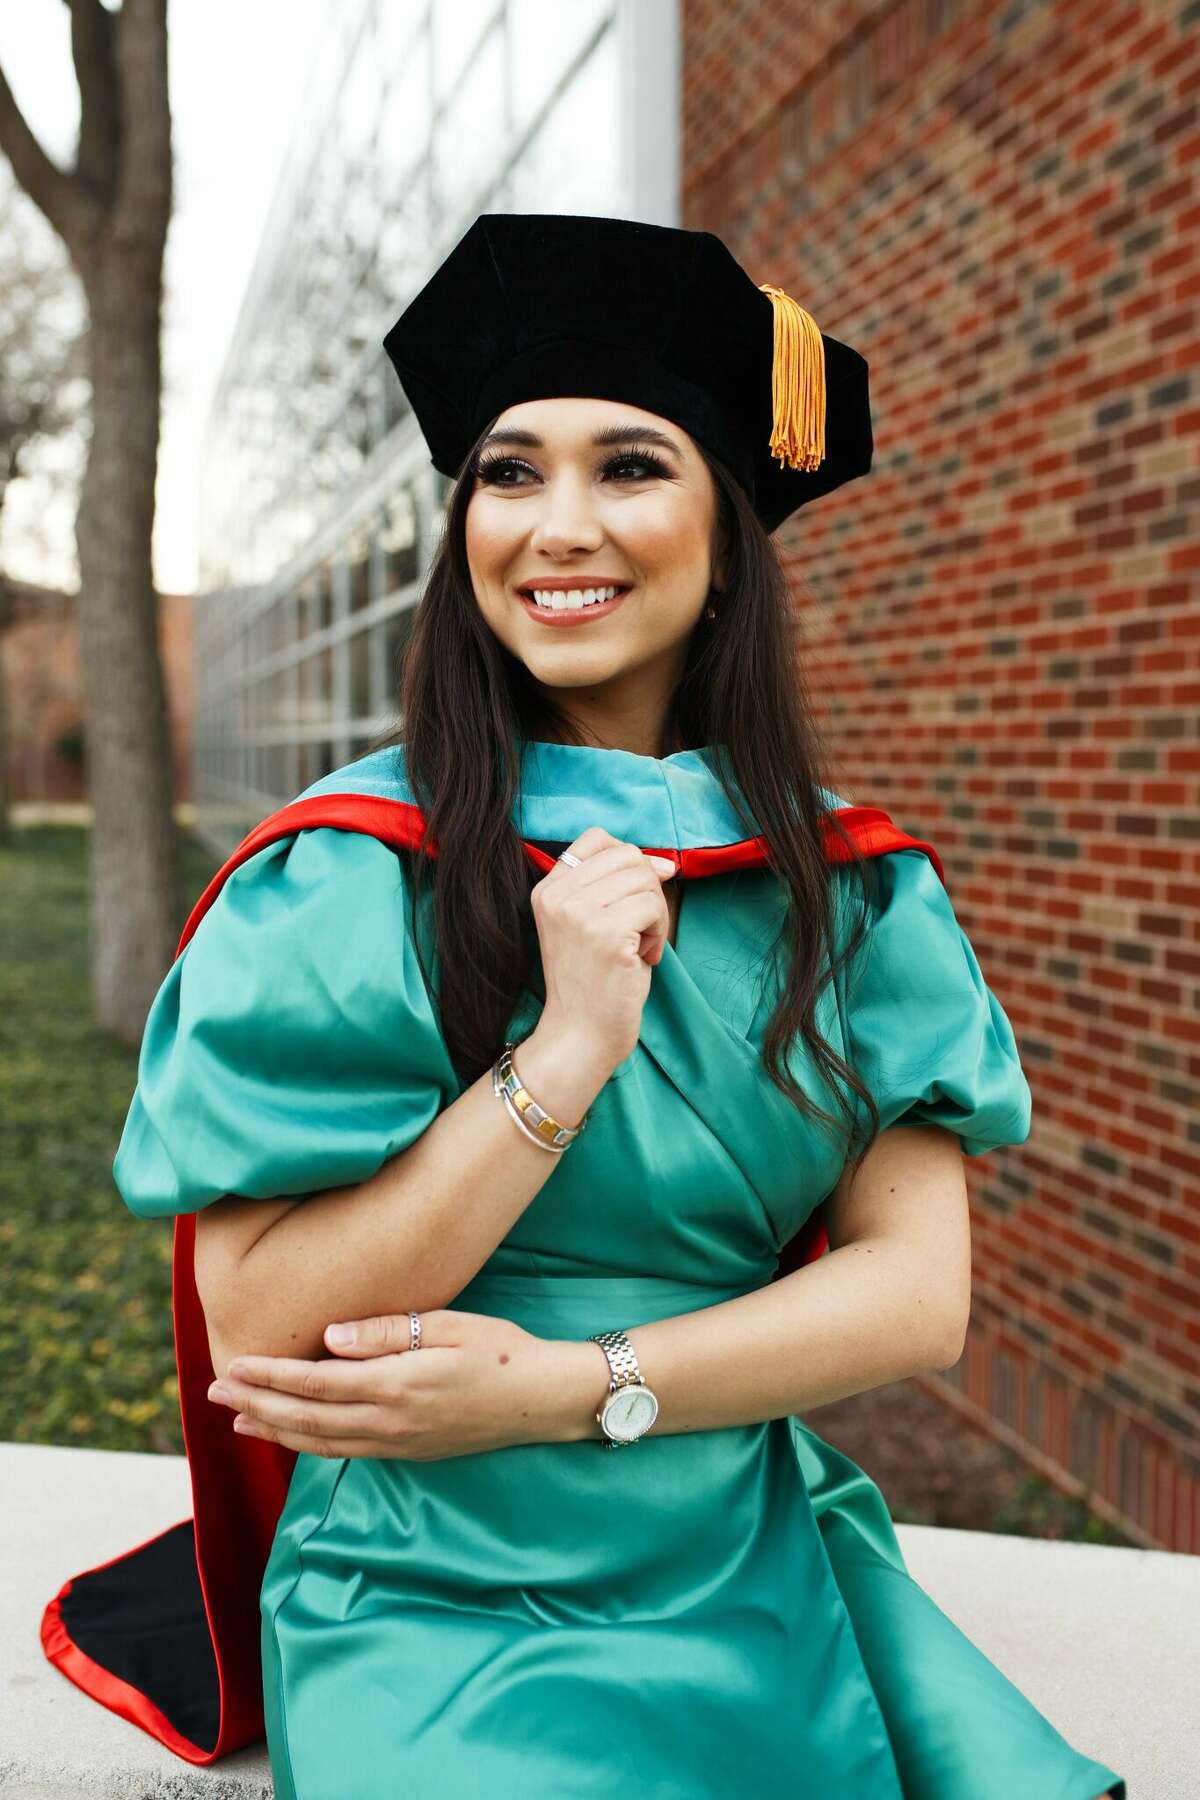 Laredoan Dr. Thelzy Ruth Zamarron graduated Valedictorian in the May Class of 2022 of the University of Incarnate Word Rosenberg School of Optometry. She will move to a Laredo practice to help with the community's medically undeserved designation.